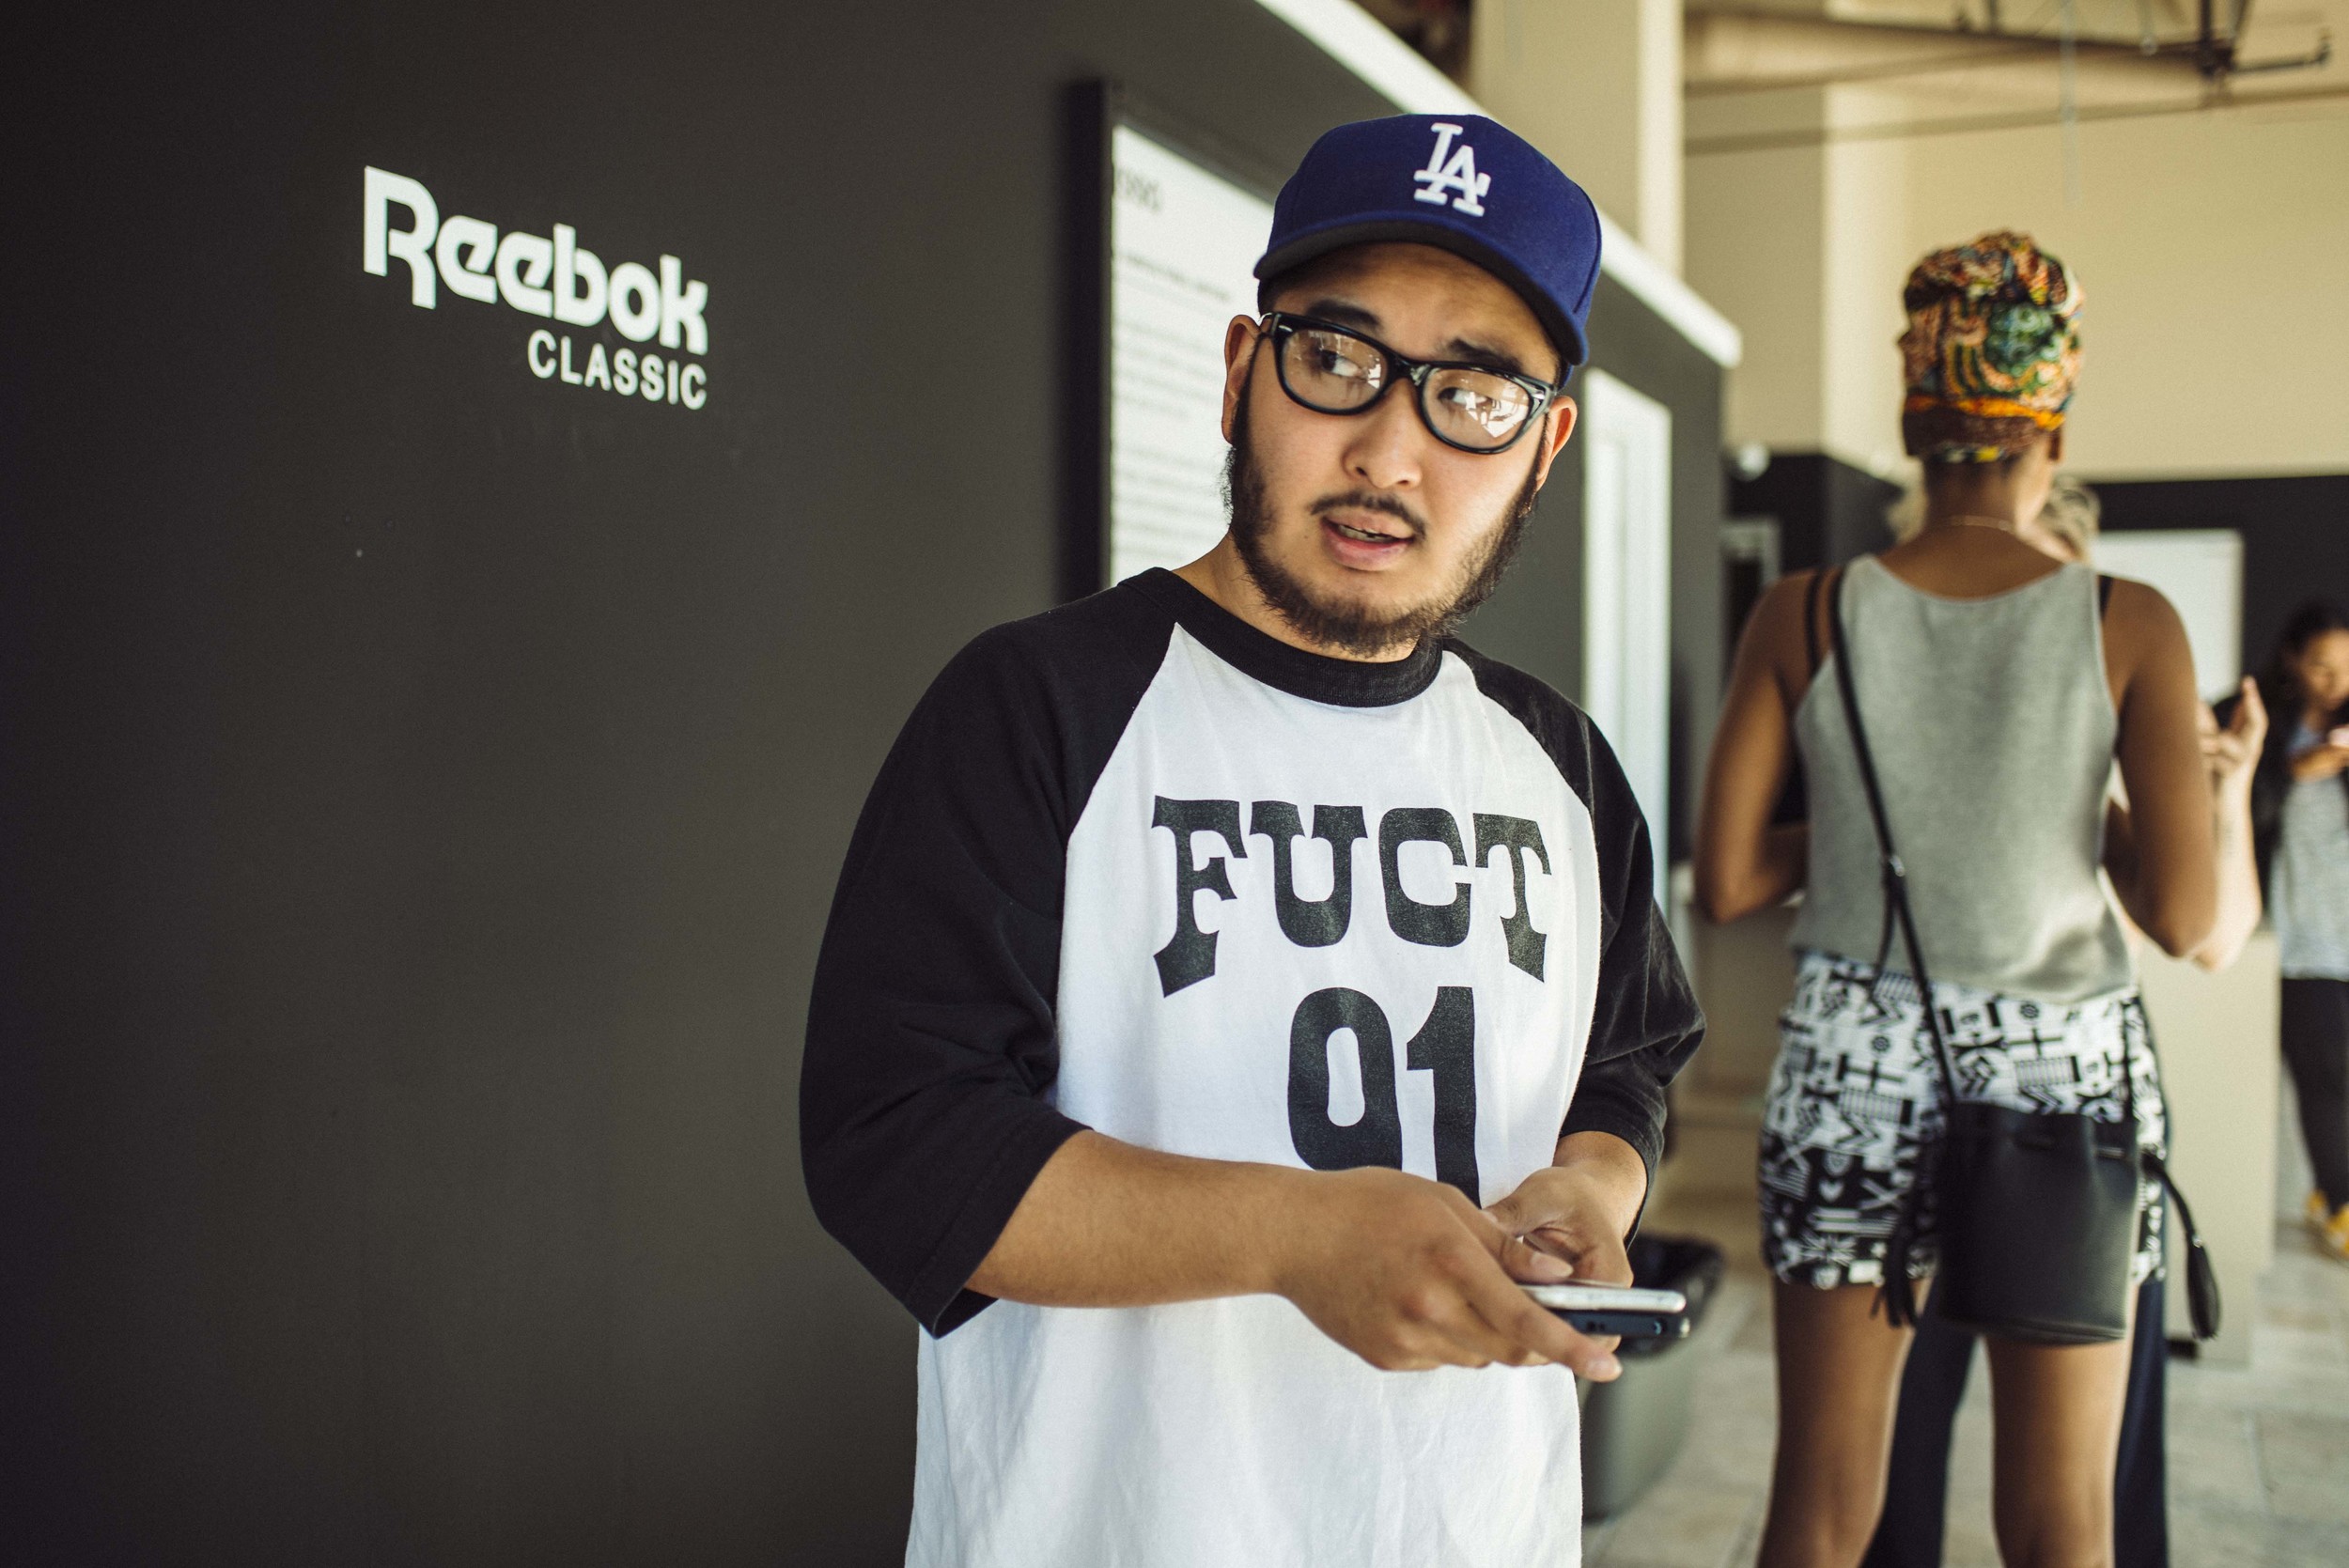  Reebok Classics event in Downtown Los Angeles. Pictured: Michael Pak.&nbsp;/ Photo: © Diane Abapo for SUSPEND Magazine. 